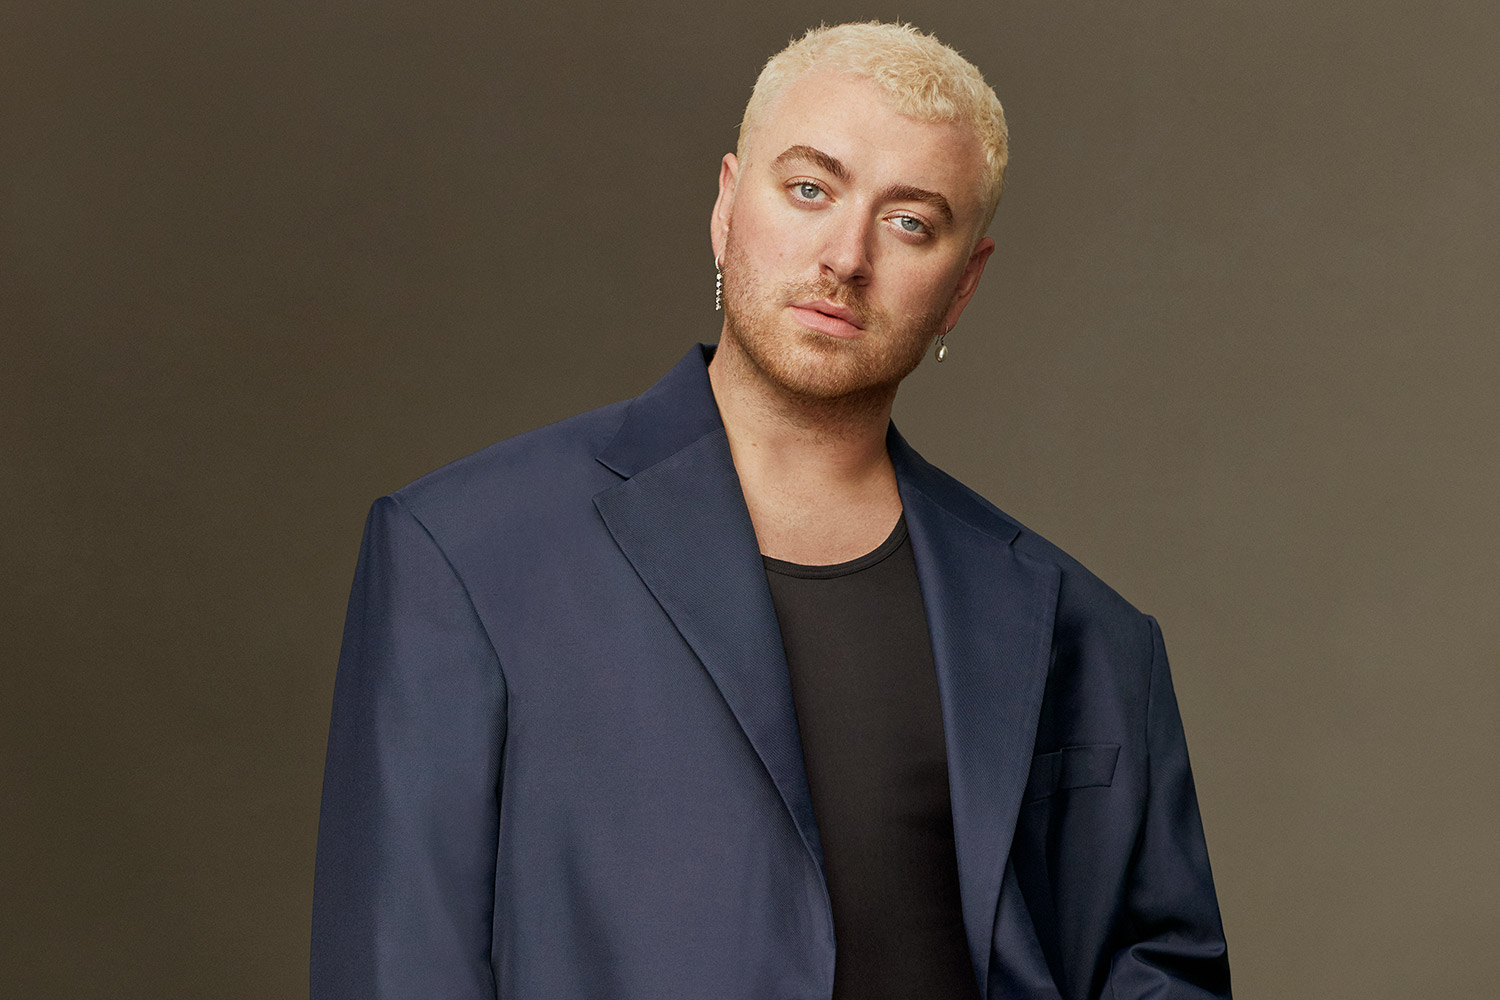 Sam Smith Announces Upcoming 4th Studio Album 'Gloria' and Says It 'Feels Like a Coming of Age'